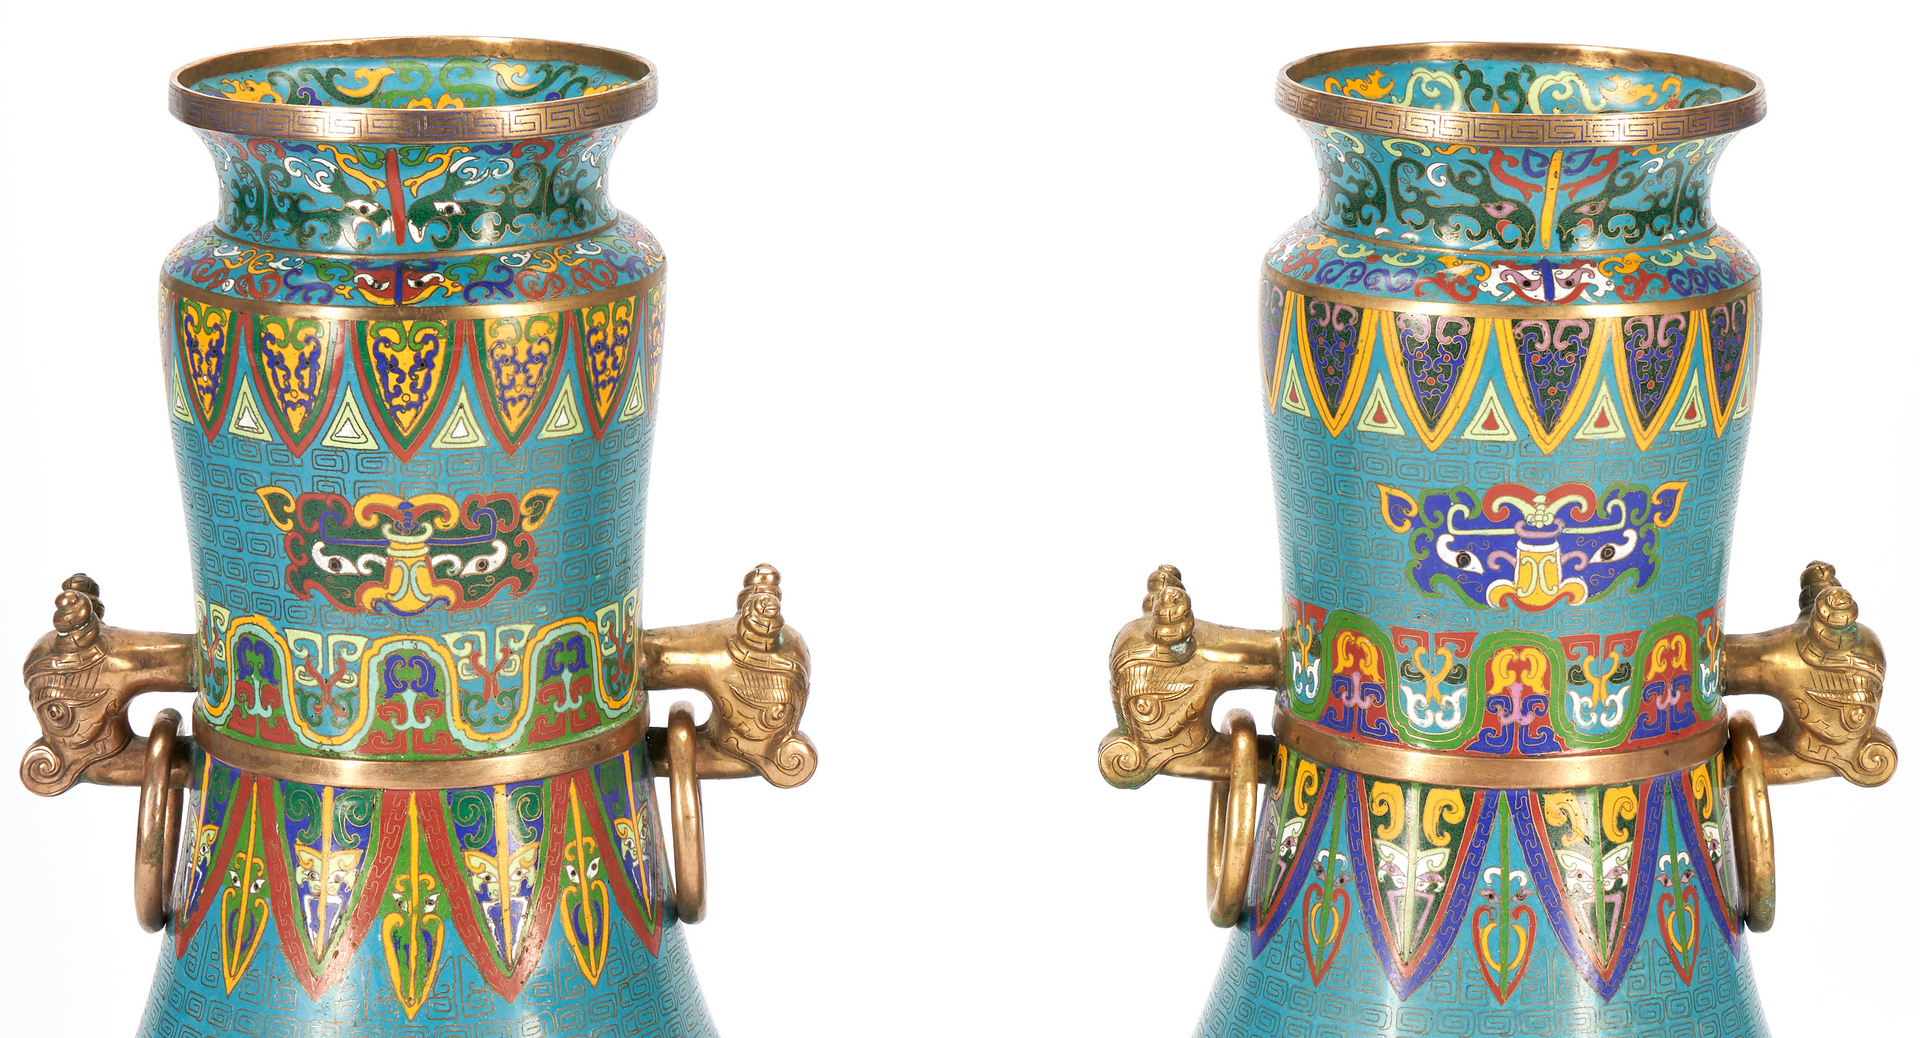 Lot 26: Pair Large Chinese Bronze Mounted Cloisonne Vases